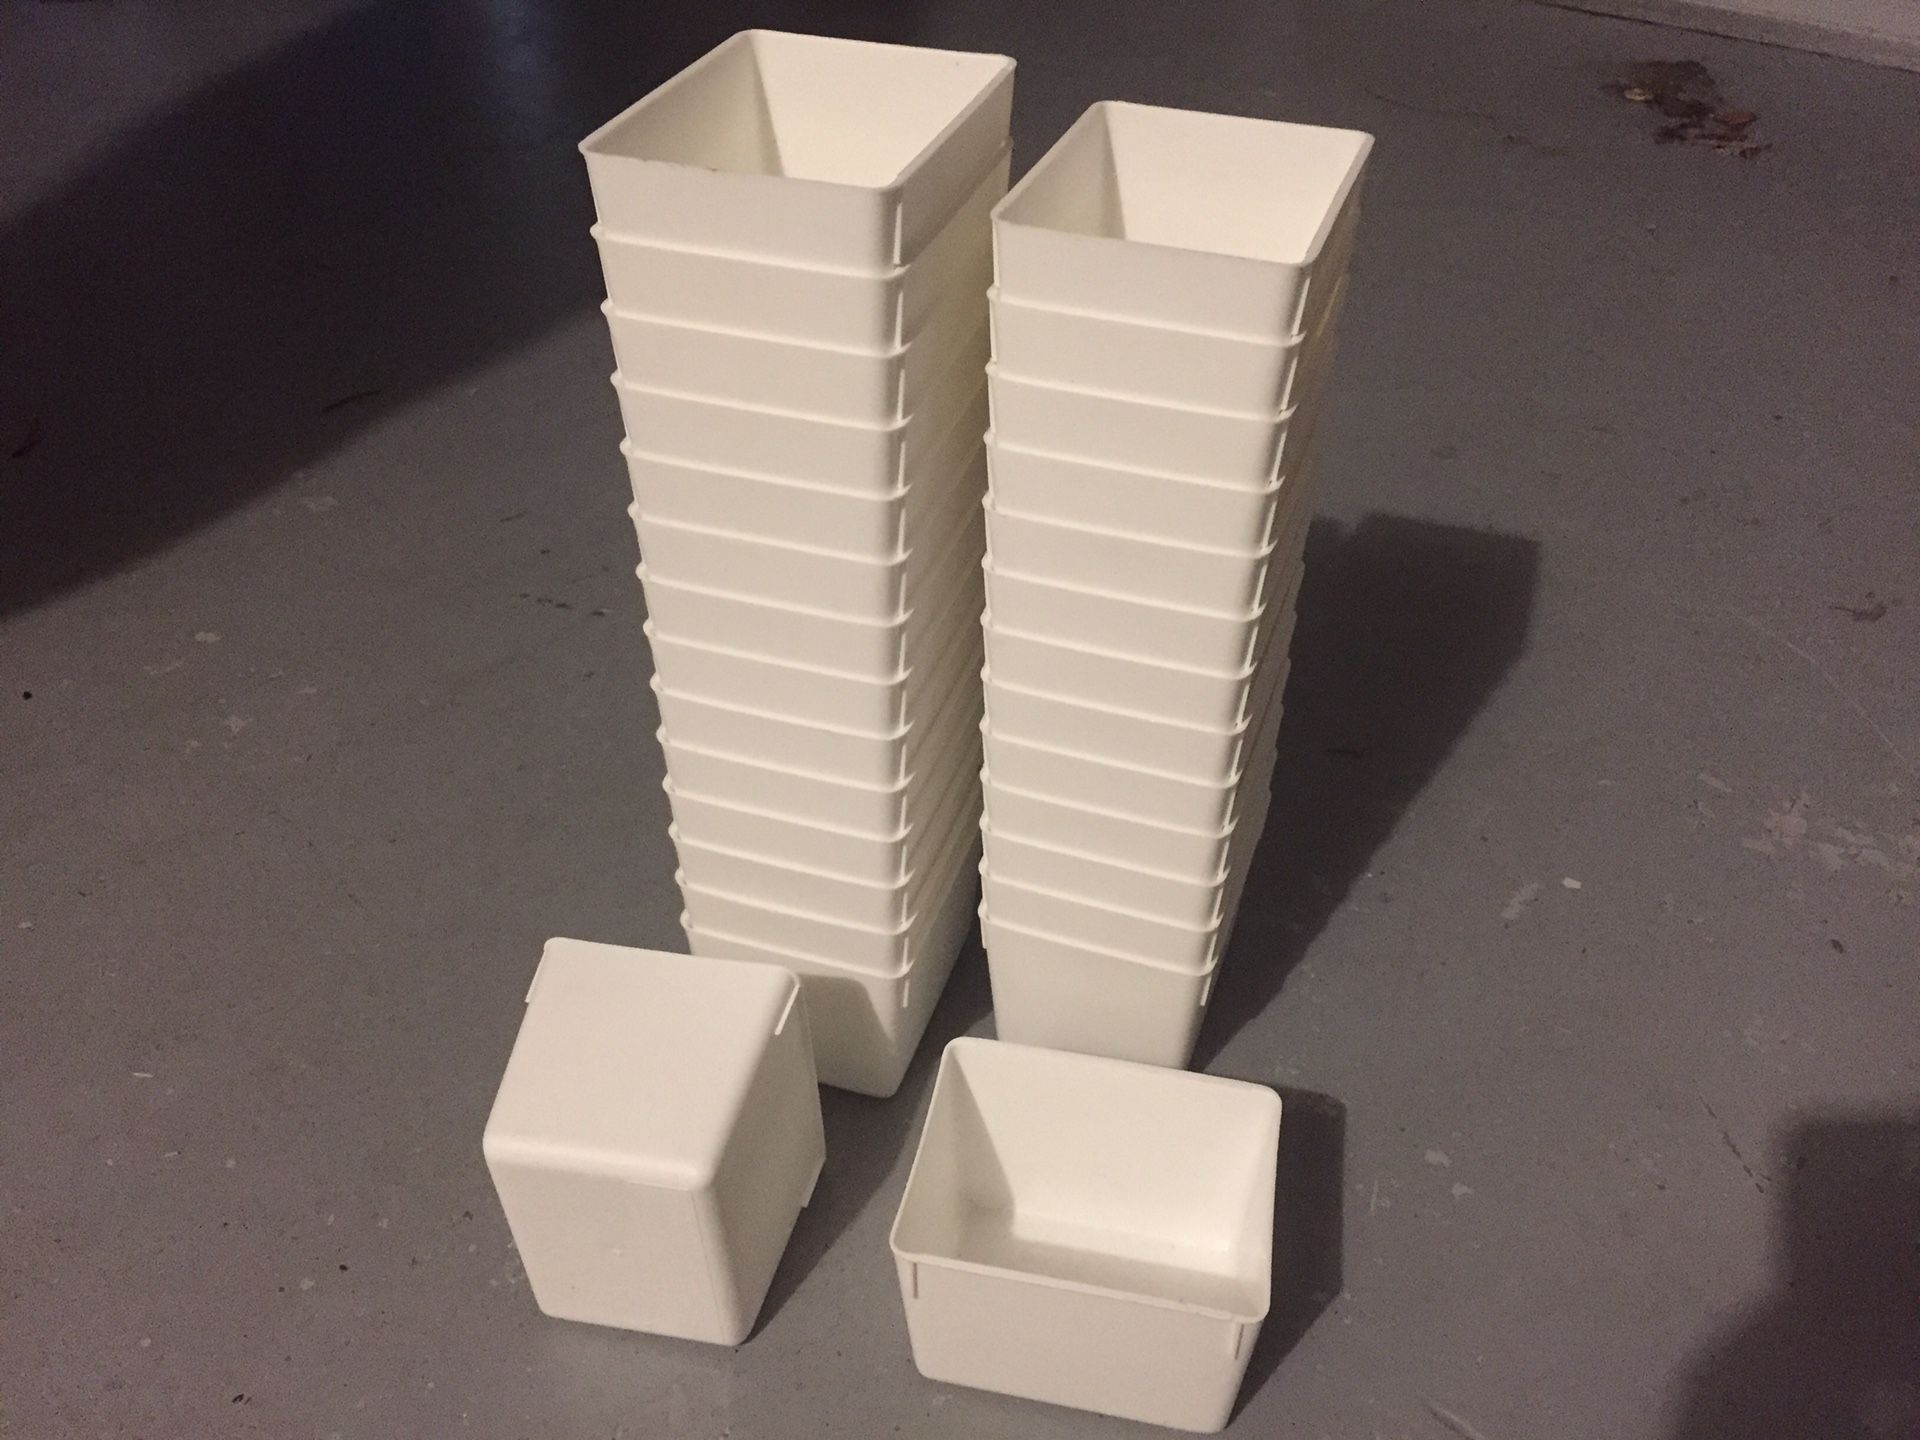 29 White Plastic Containers for Storage 10x8x7 cm